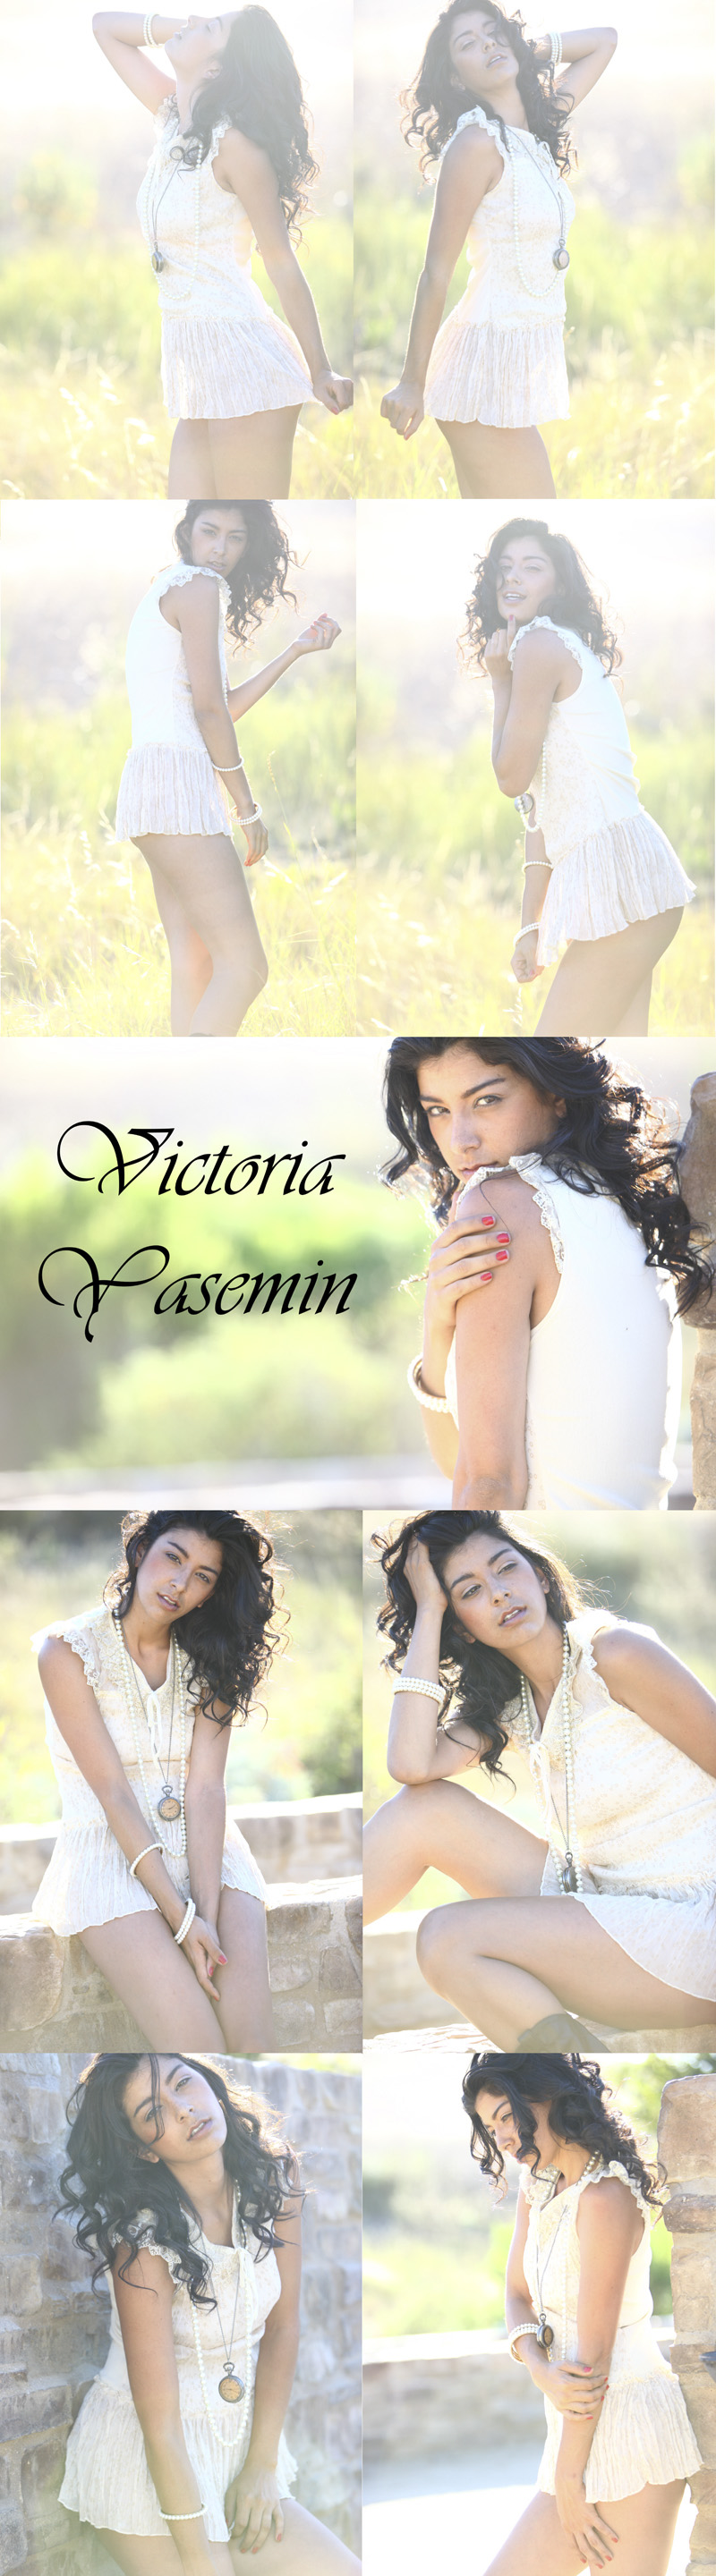 Female model photo shoot of VictoriaYasemin by Mission Photography, retouched by OC_Photographer